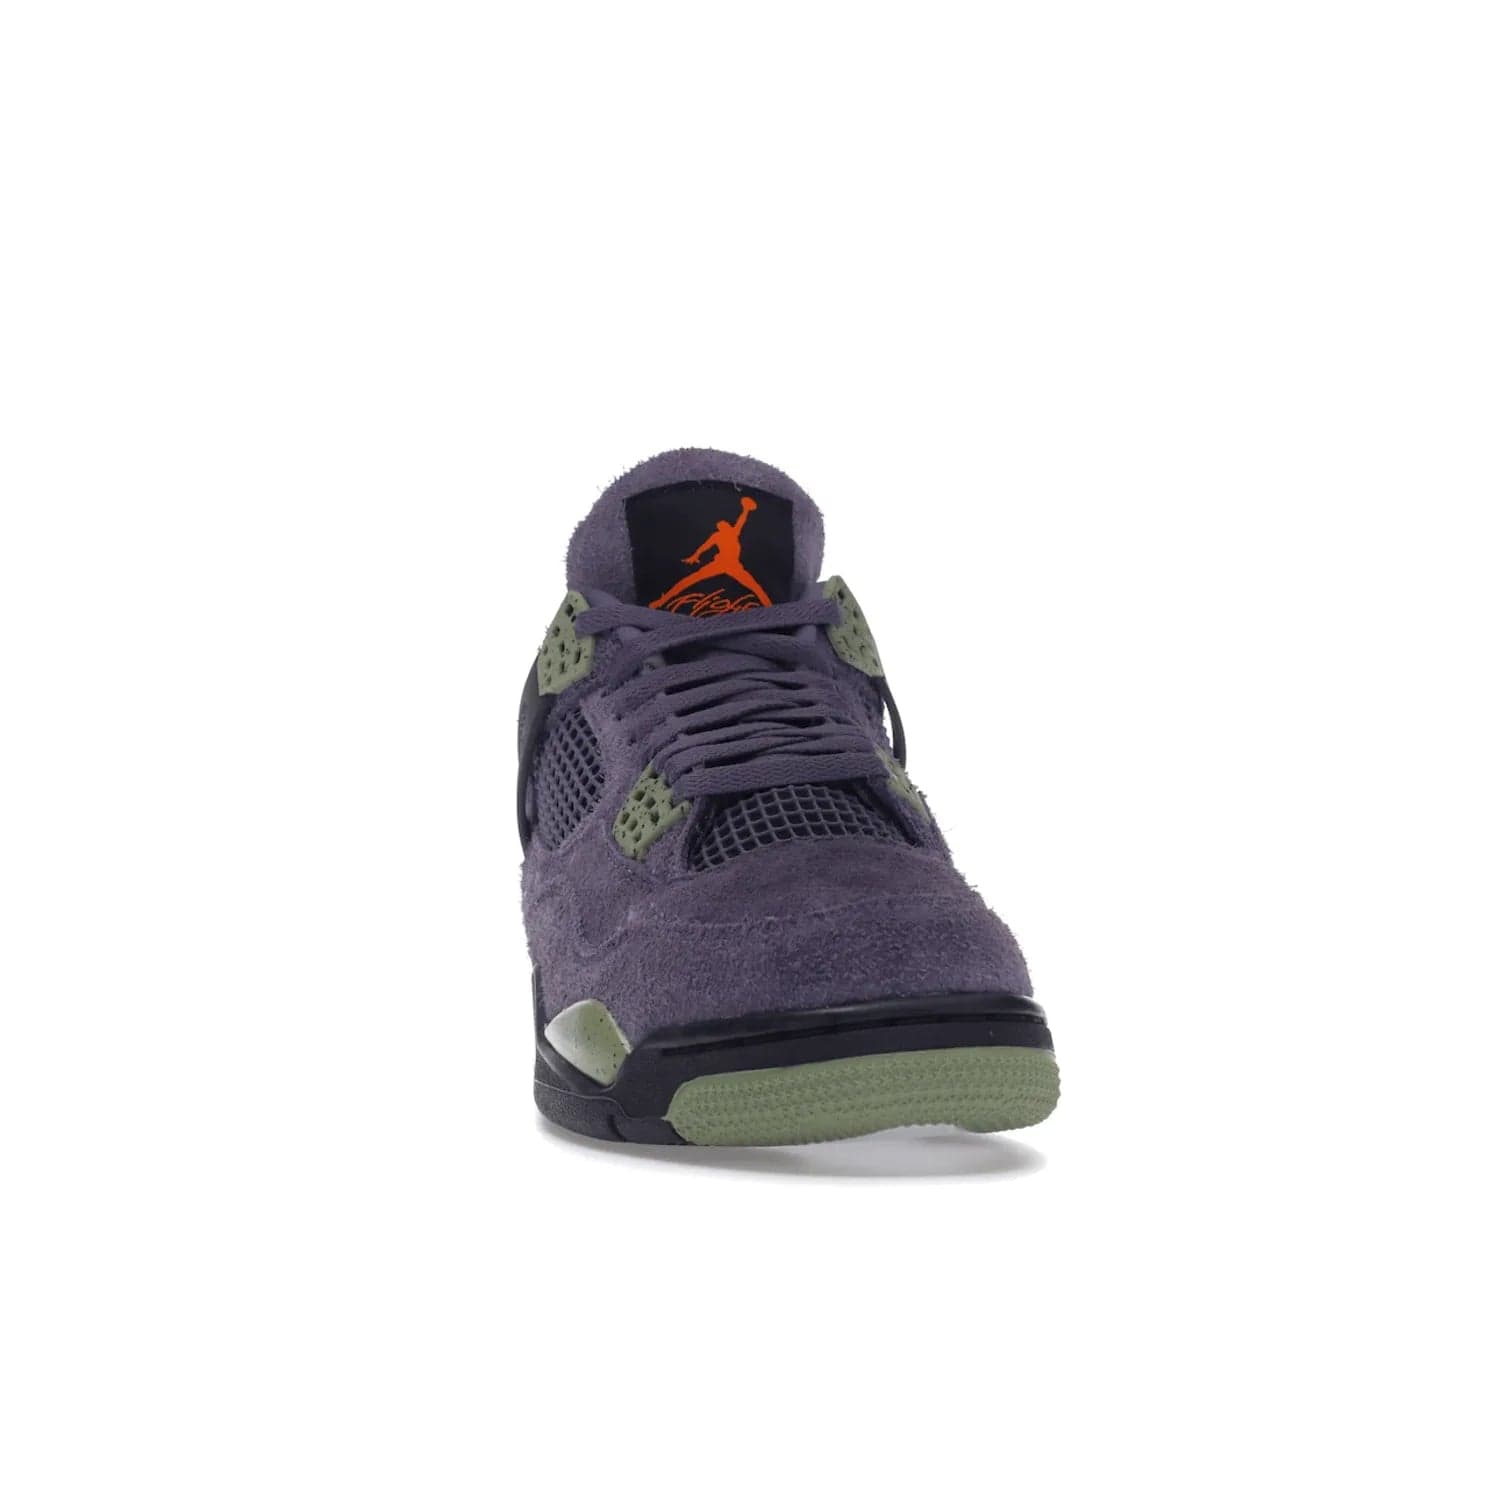 Jordan 4 Retro Canyon Purple (Women's) - Image 9 - Only at www.BallersClubKickz.com - New Air Jordan 4 Retro Canyon Purple W sneaker features shaggy purple suede, lime highlights & safety orange Jumpman branding. Classic ankle-hugging silhouette with modern colors released 15/10/2022.